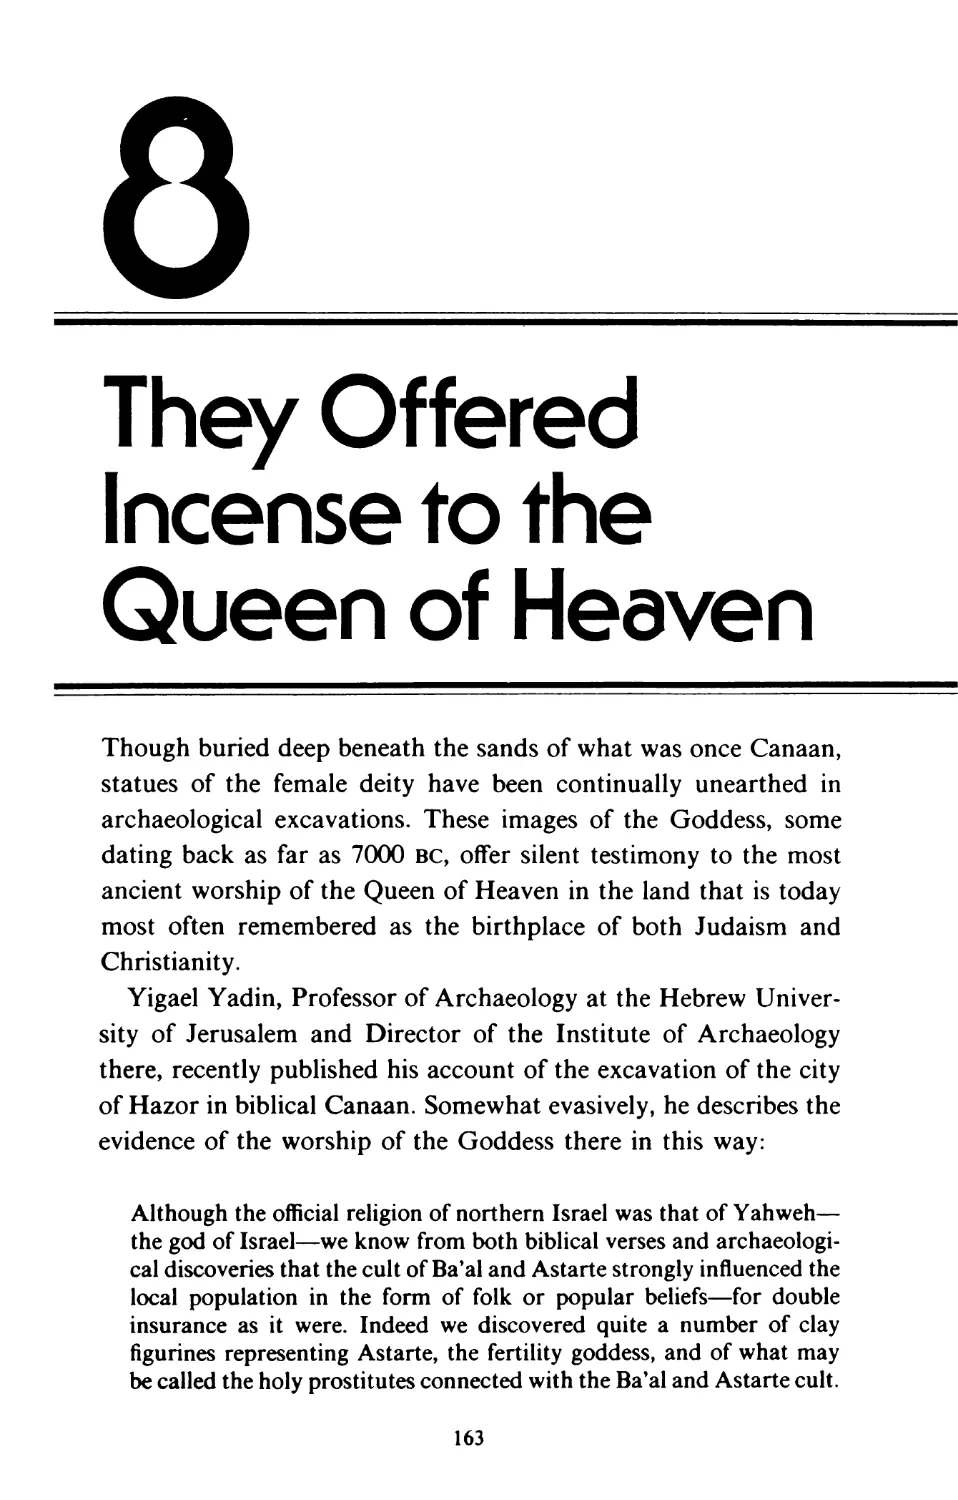 8 They Offered Incense to the Queen of Heaven